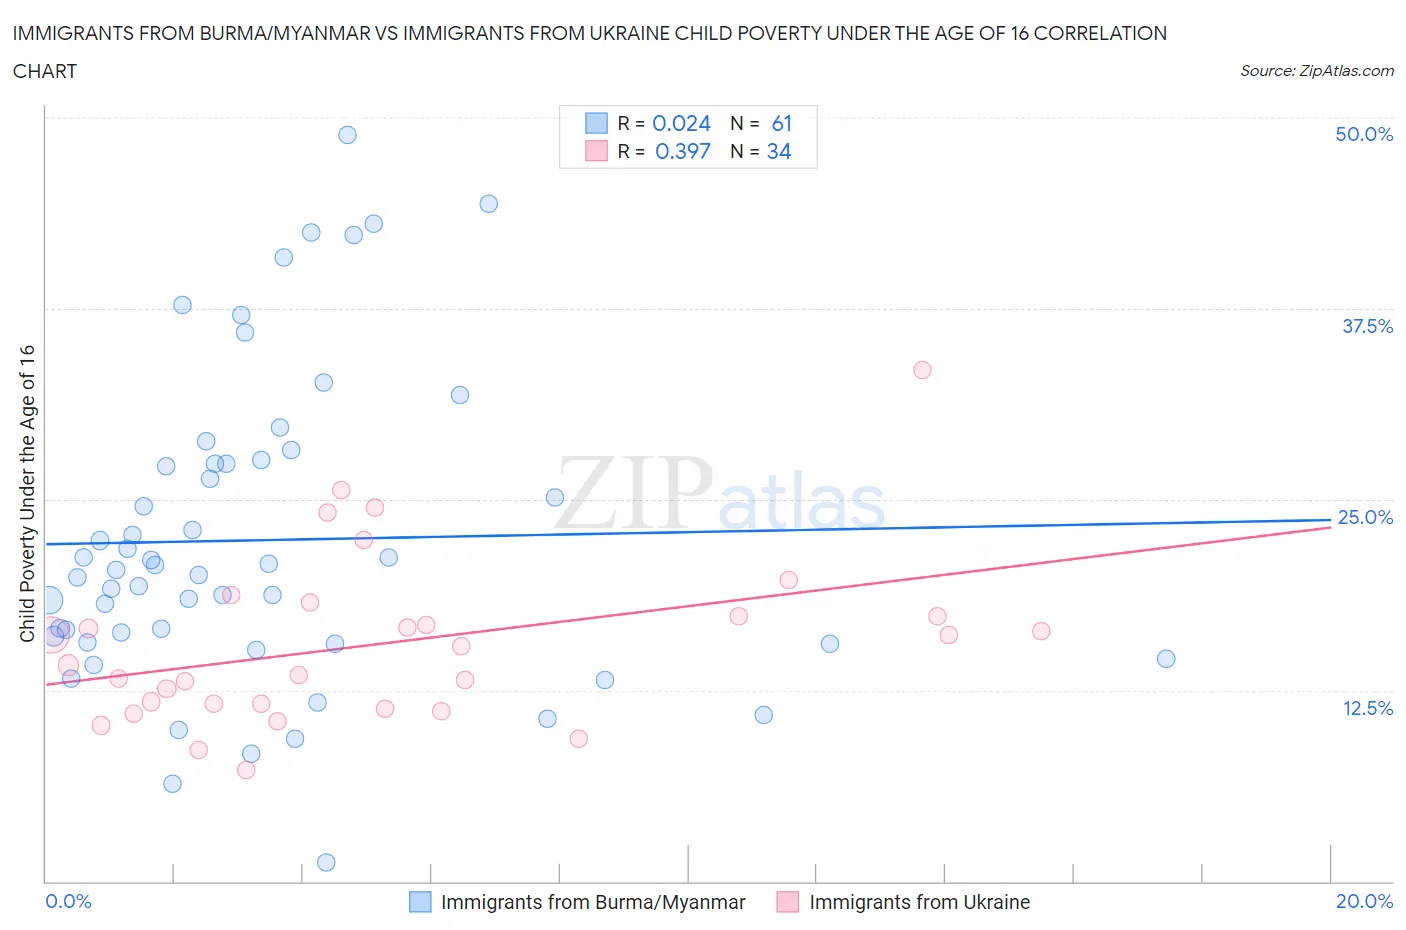 Immigrants from Burma/Myanmar vs Immigrants from Ukraine Child Poverty Under the Age of 16